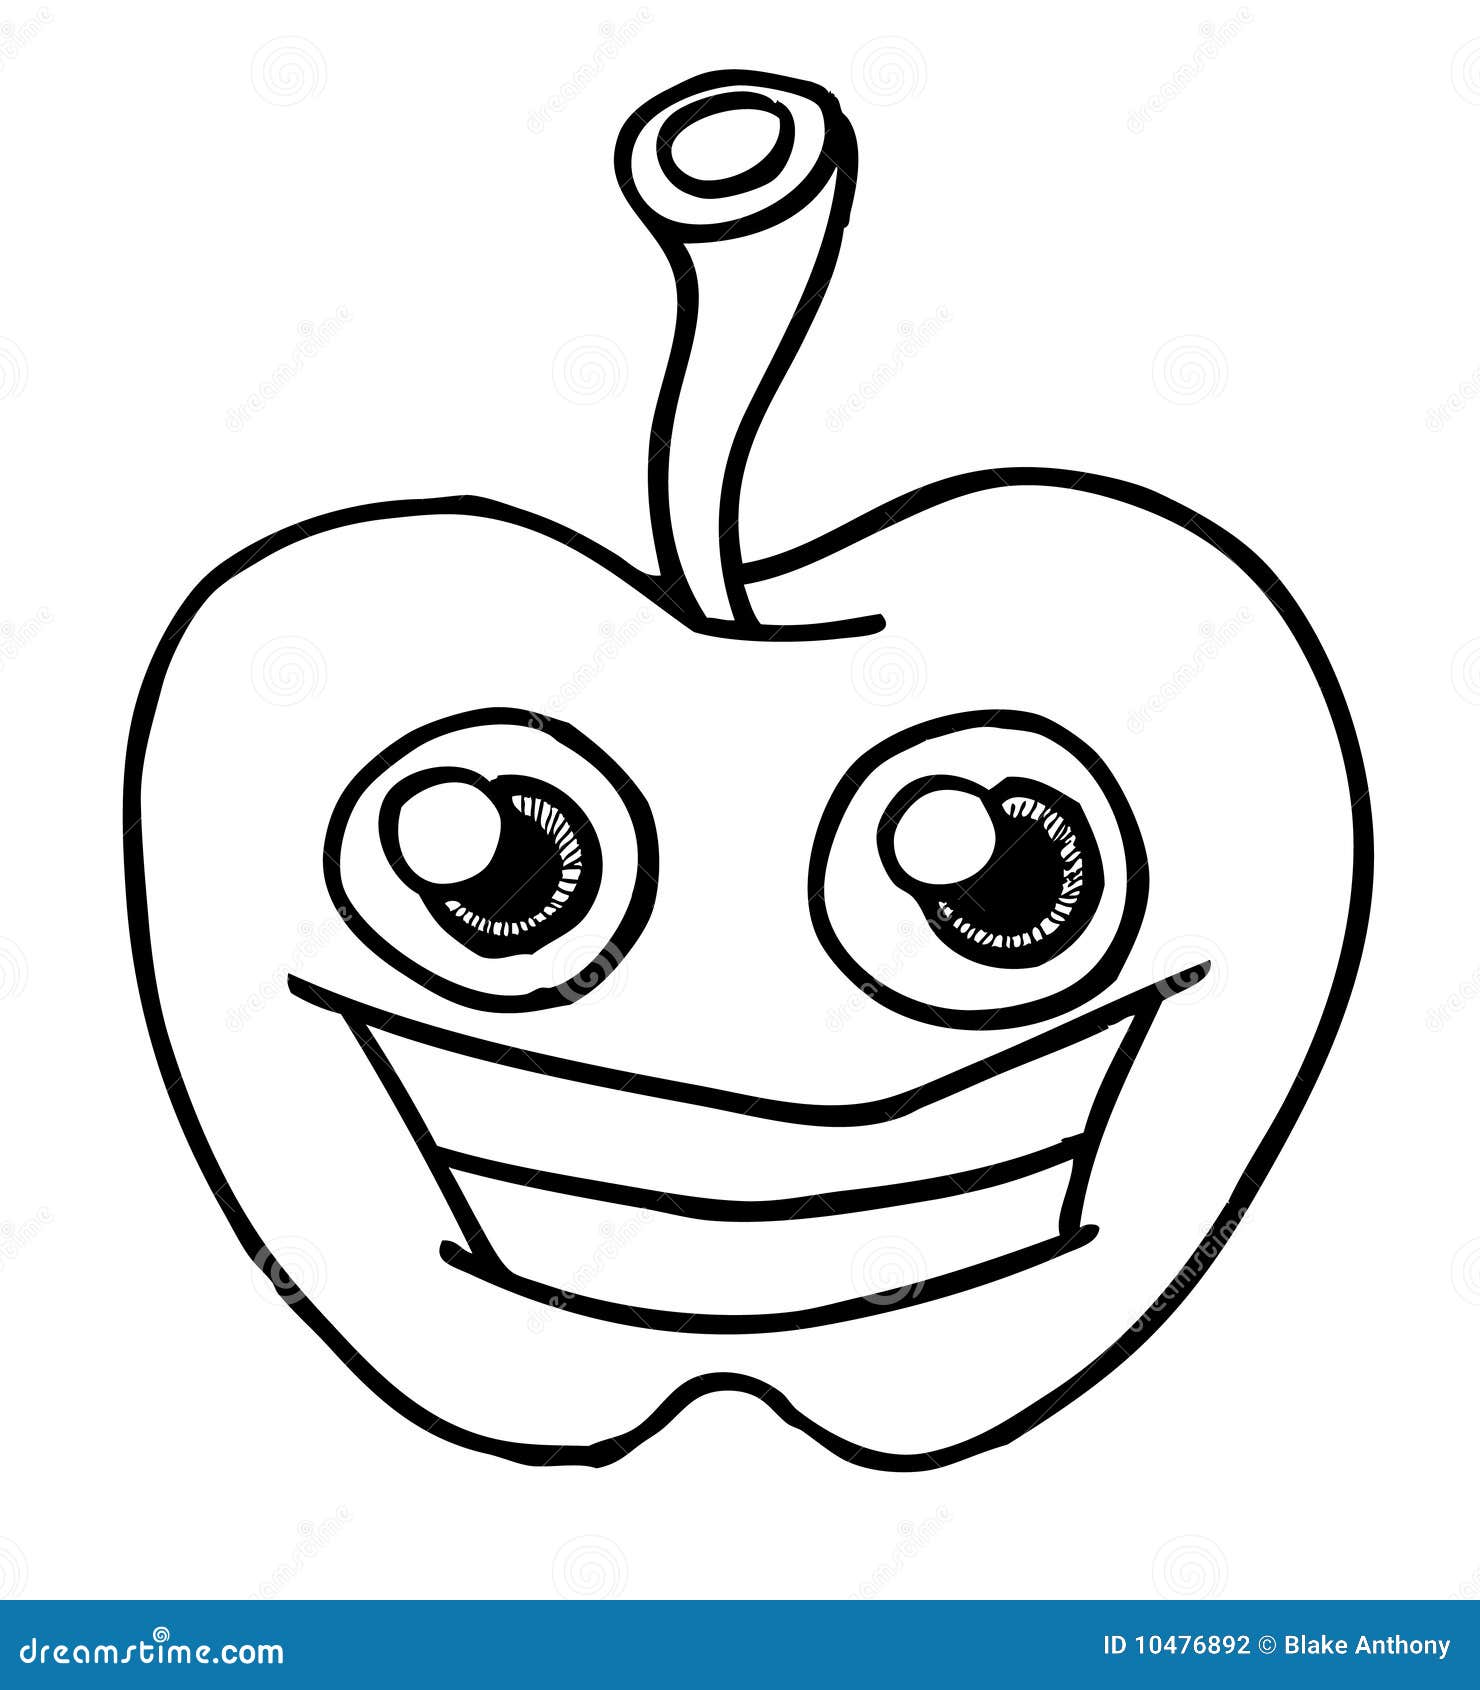 clipart apple with face - photo #22